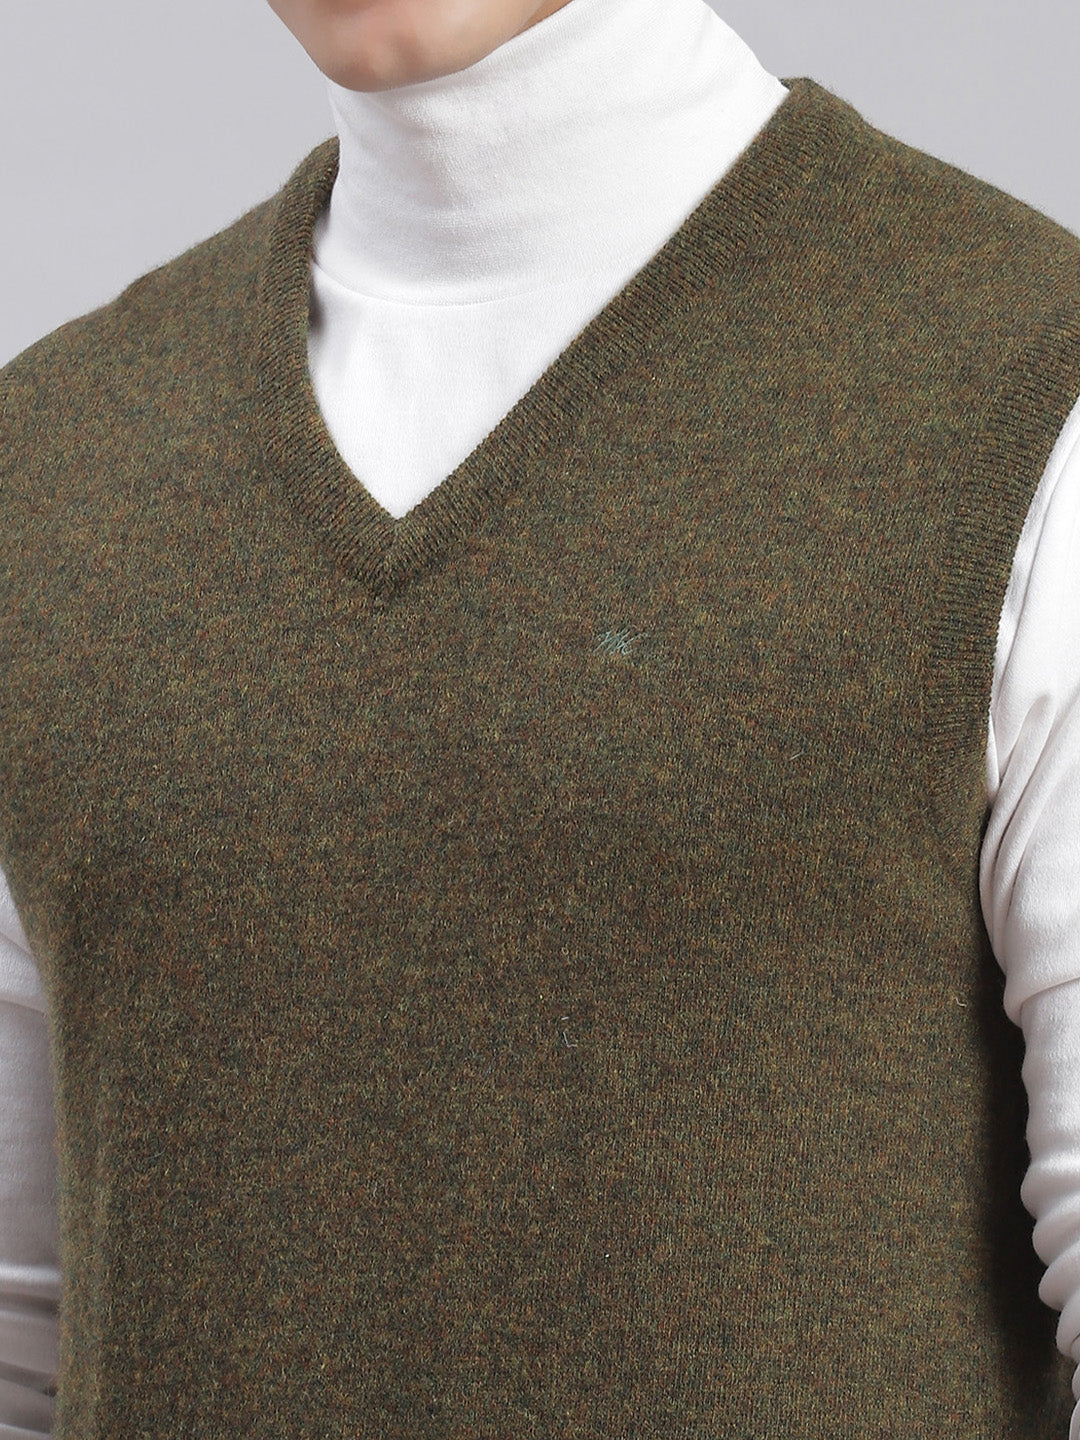 Men Olive Solid V Neck Sleeveless Sweaters/Pullovers